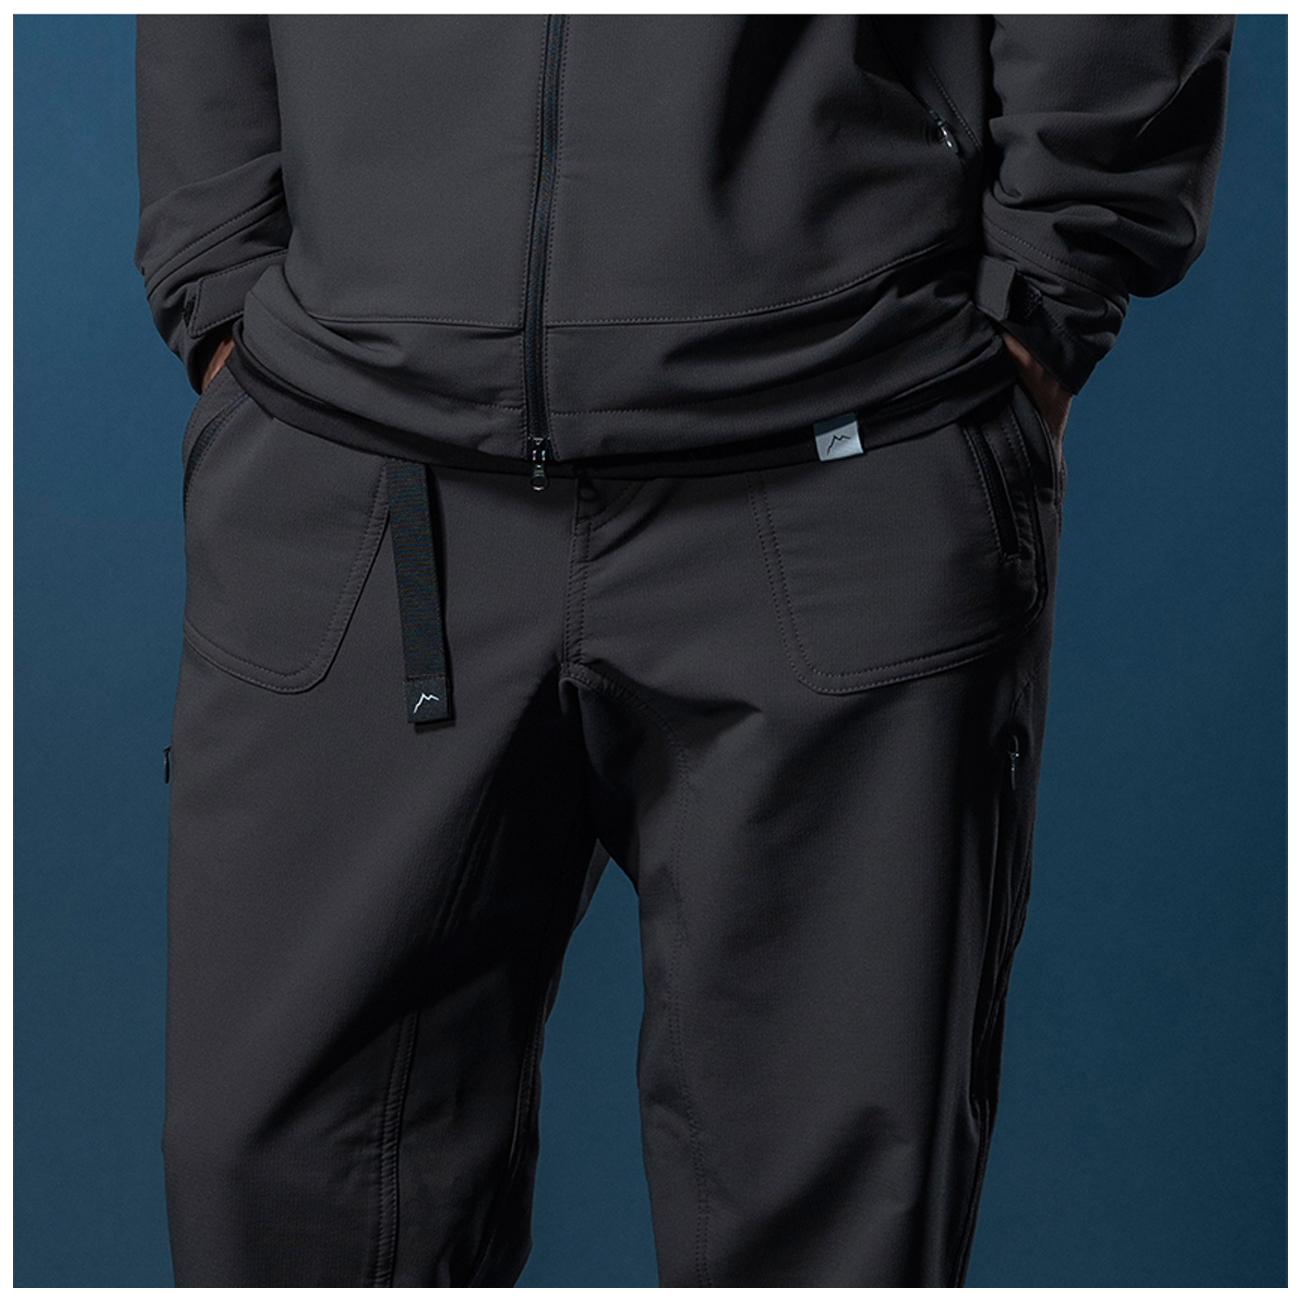 CAYL Thermo Hiking Pants- Charcoal